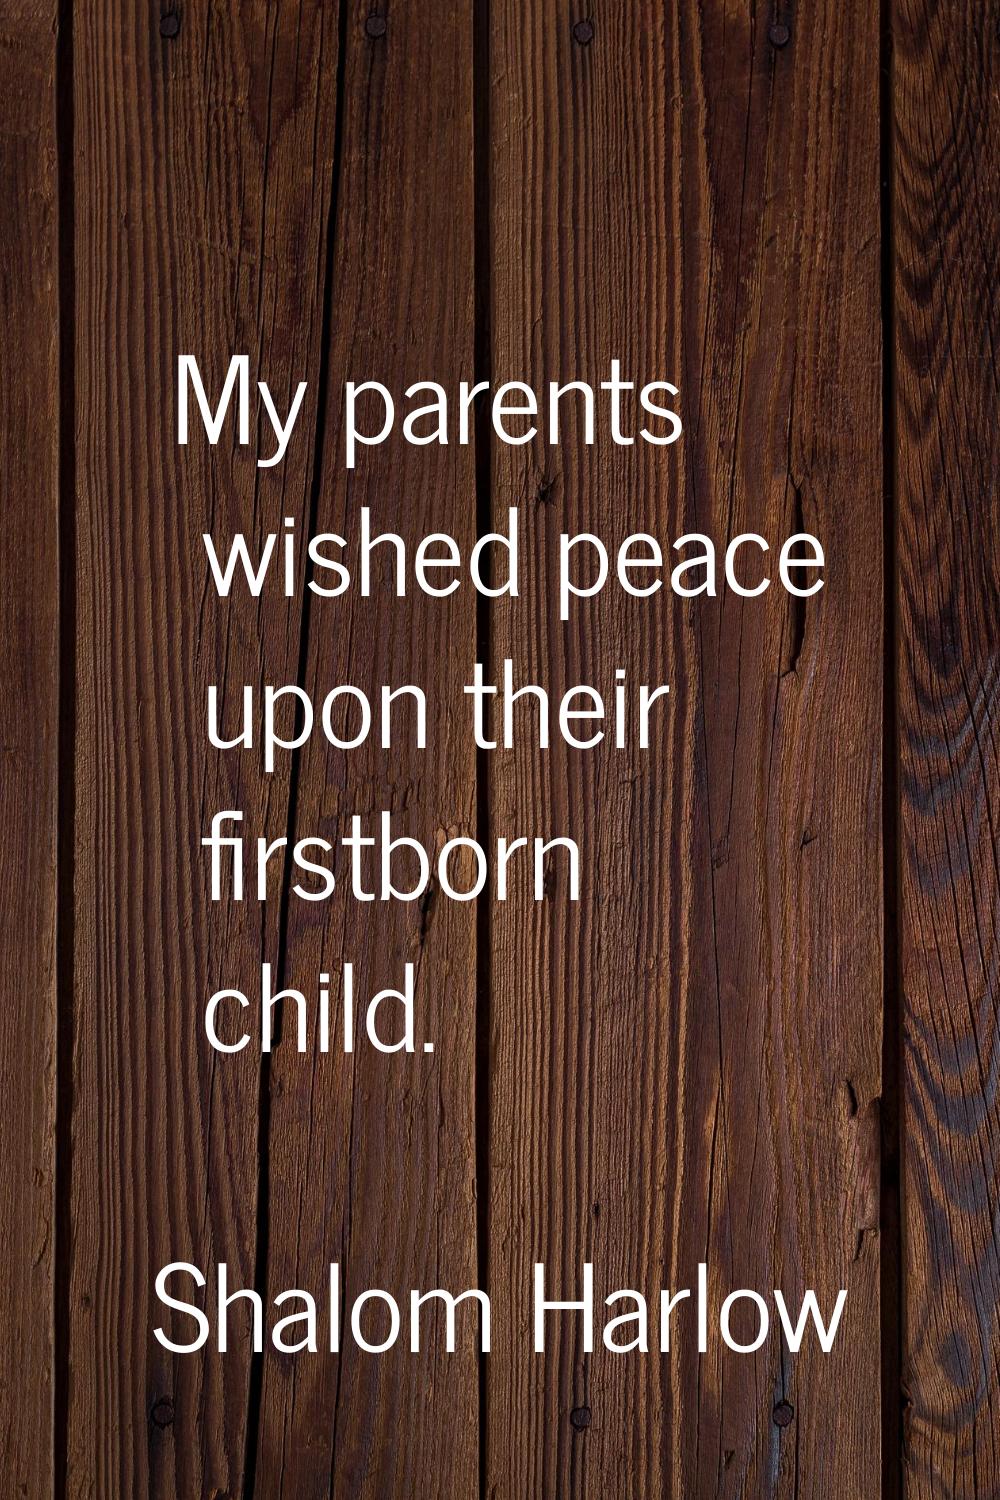 My parents wished peace upon their firstborn child.